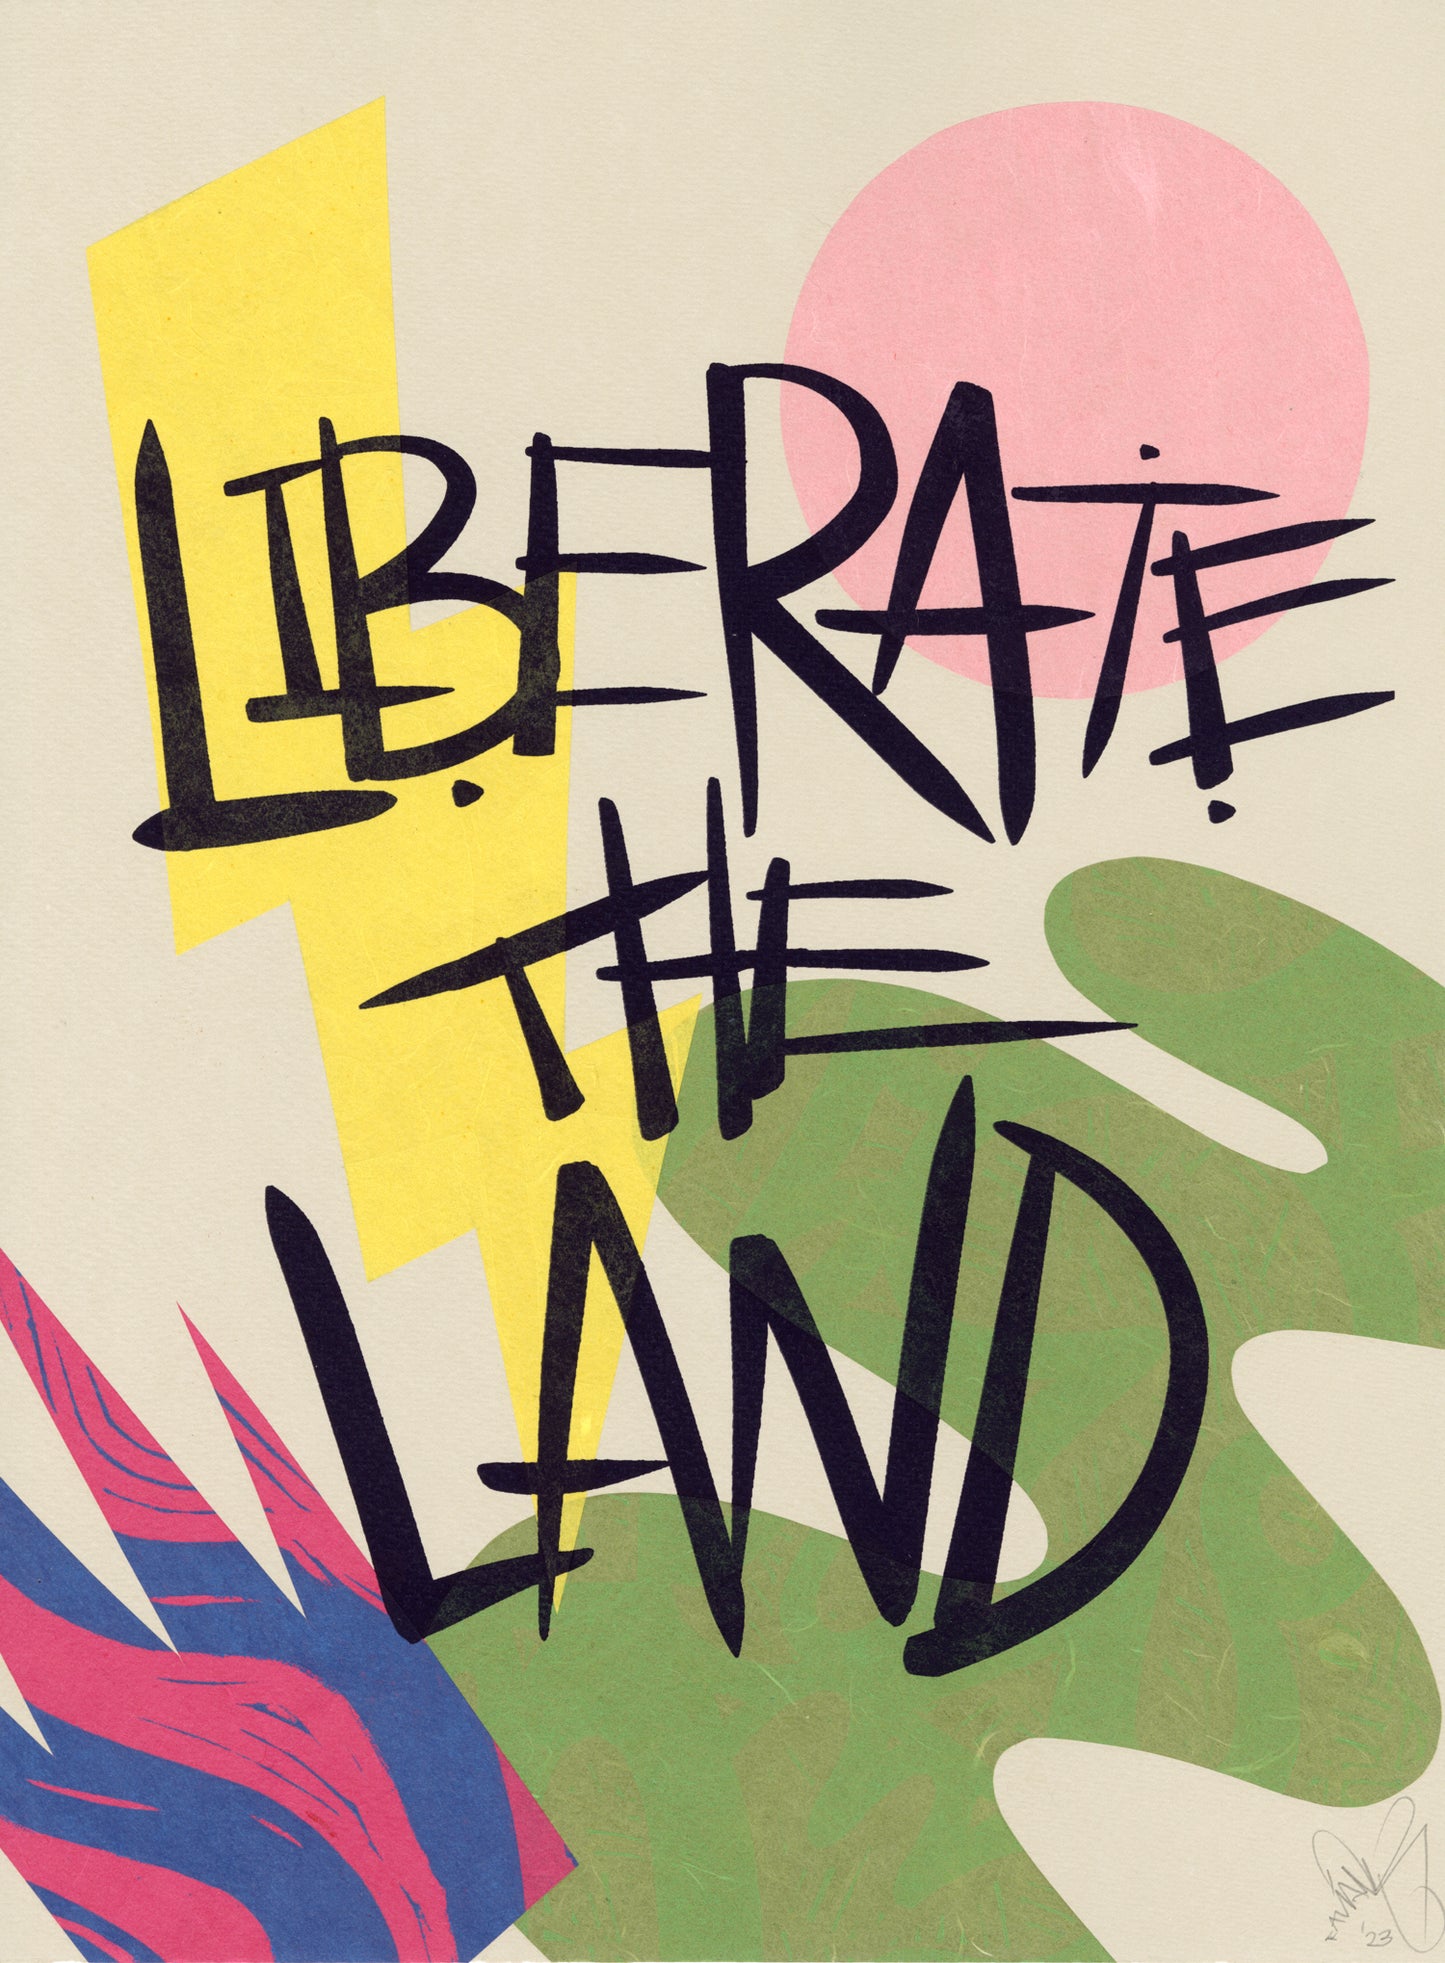 Liberate The Land 28